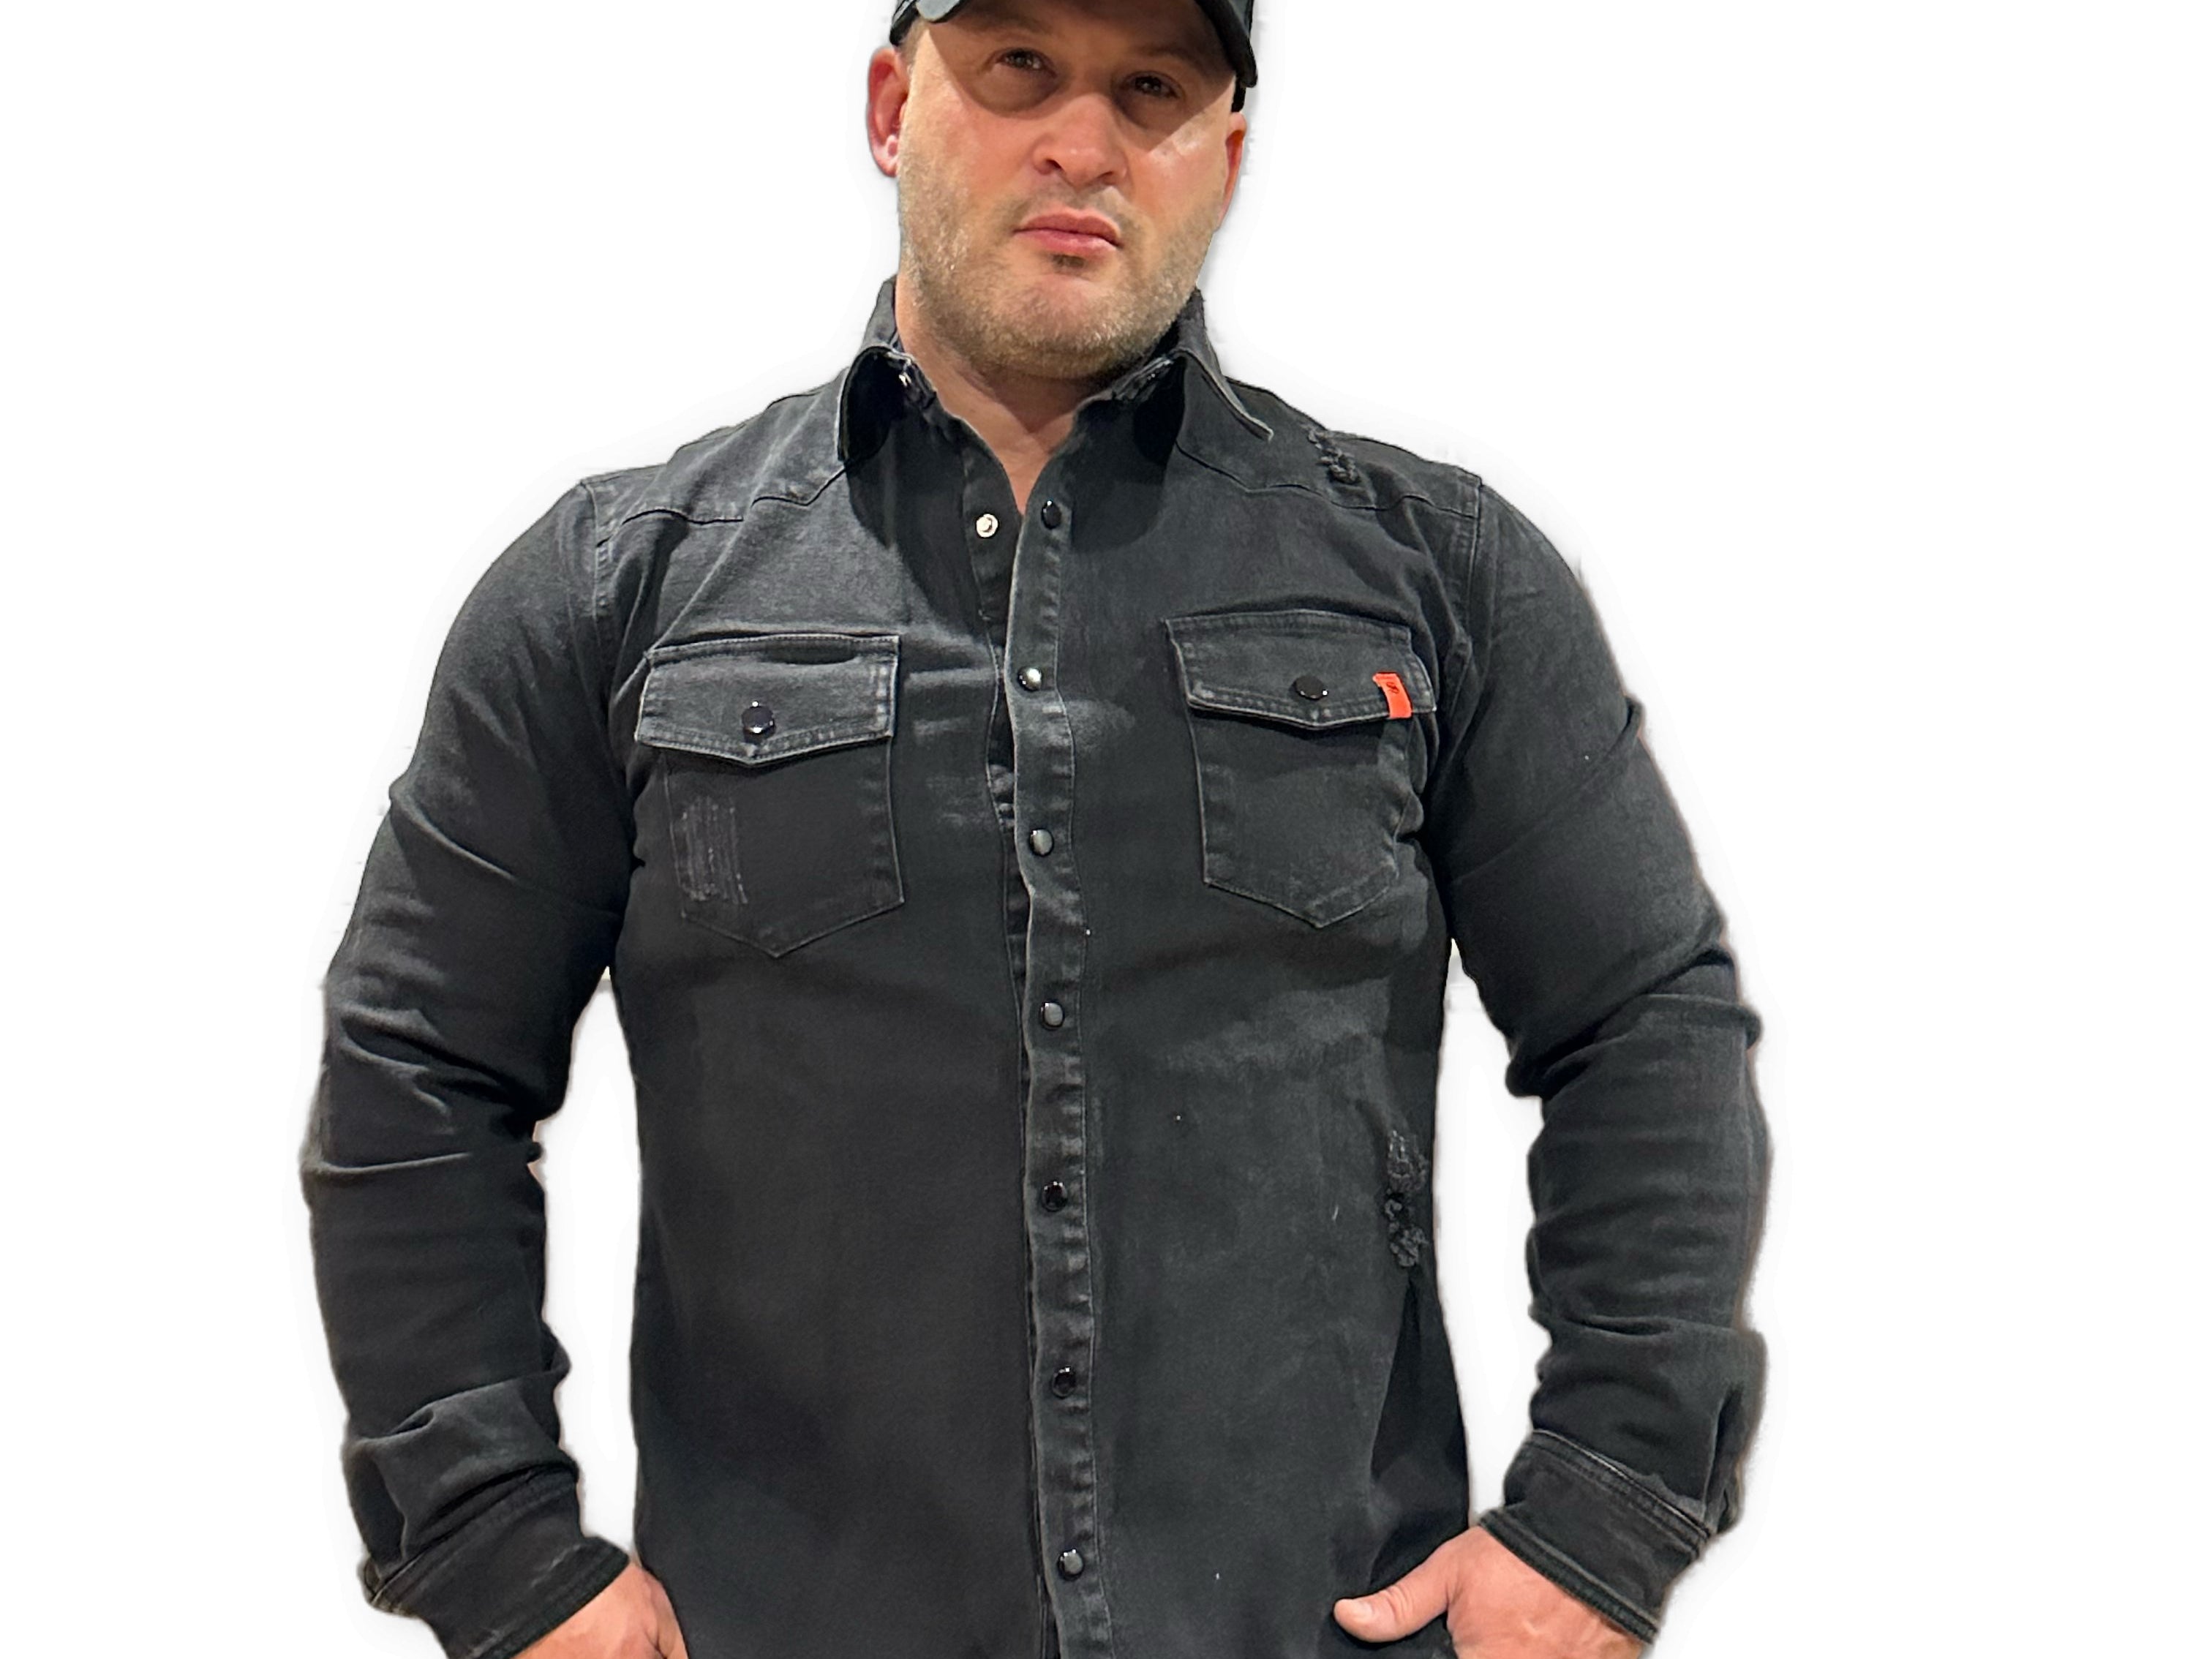 Cowboy #2 - Black Long Sleeves Jeans Shirt for Men - Sarman Fashion - Wholesale Clothing Fashion Brand for Men from Canada